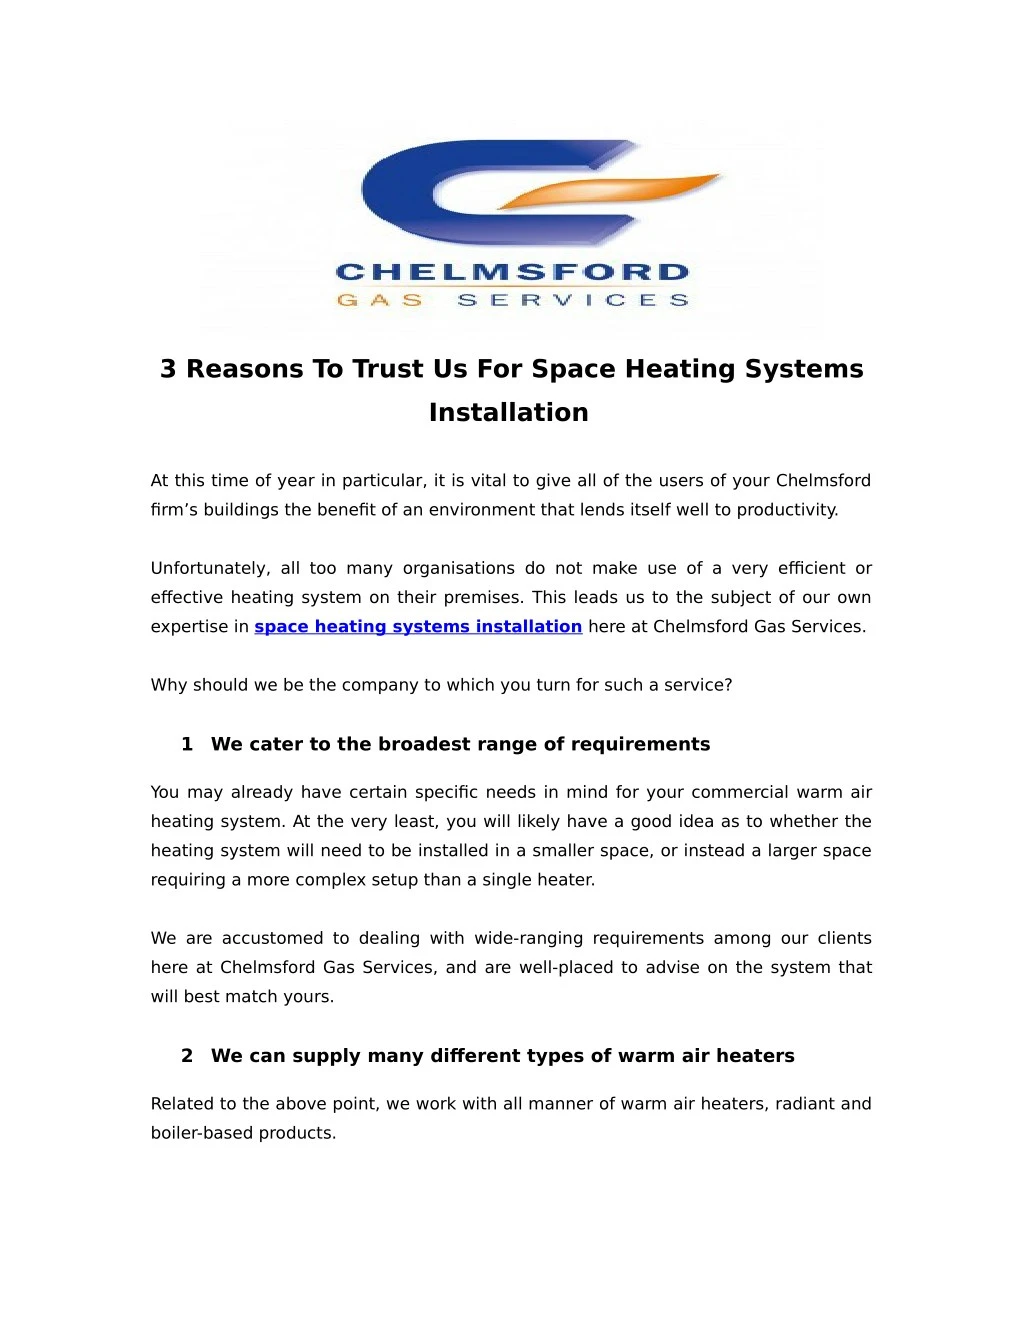 3 reasons to trust us for space heating systems